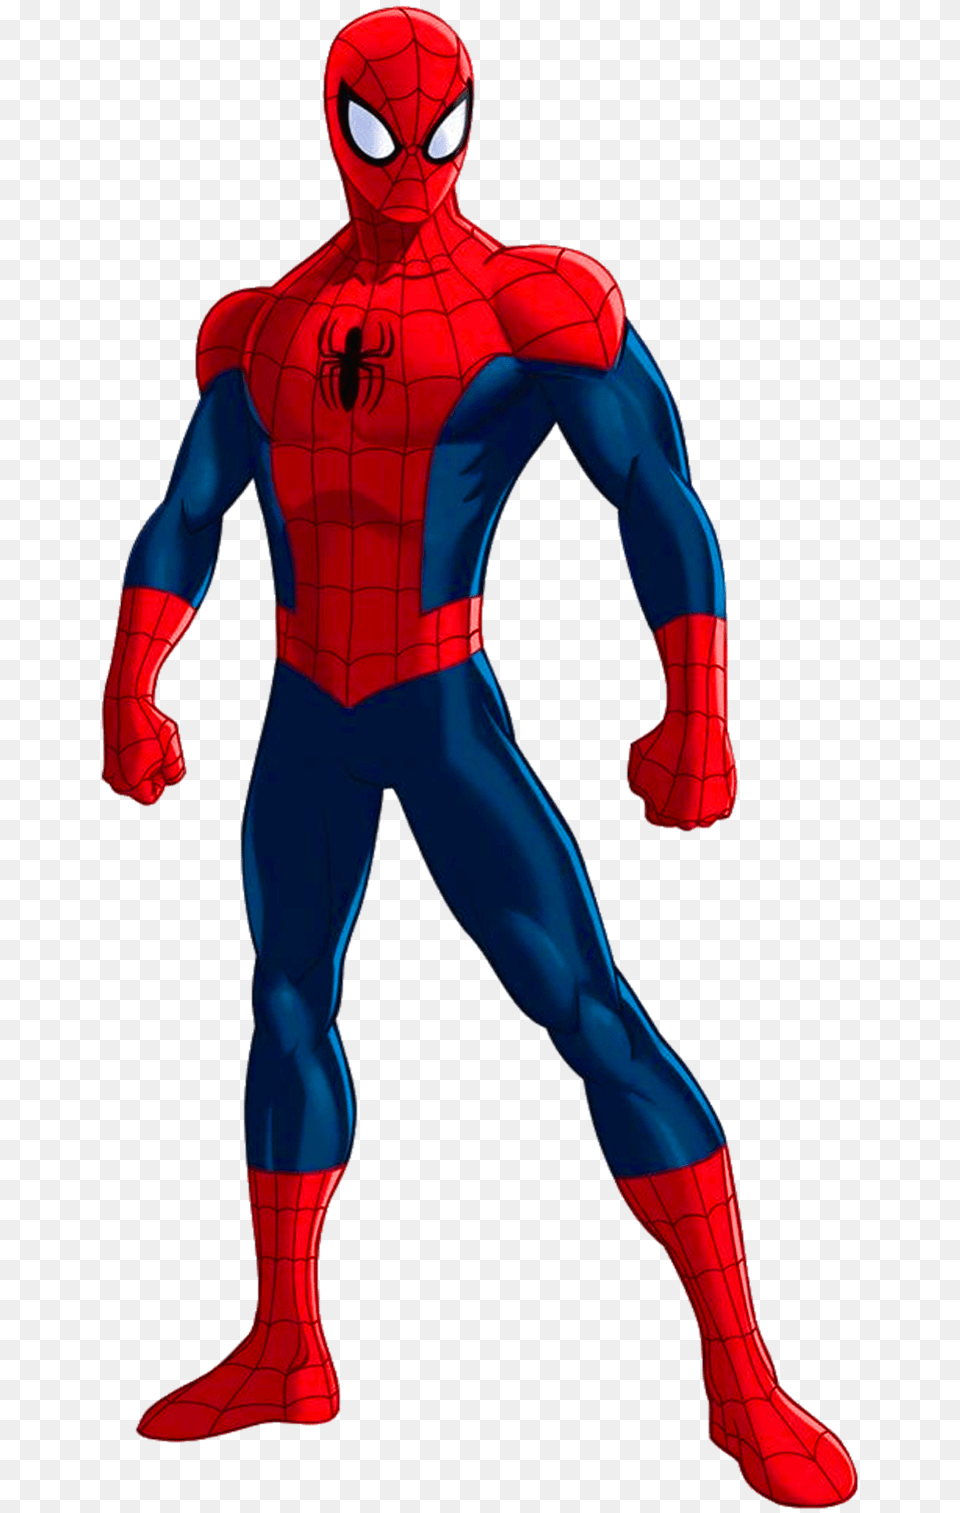 Spider Mangallery In Spiderman Printables Spiderman, Adult, Clothing, Costume, Female Png Image